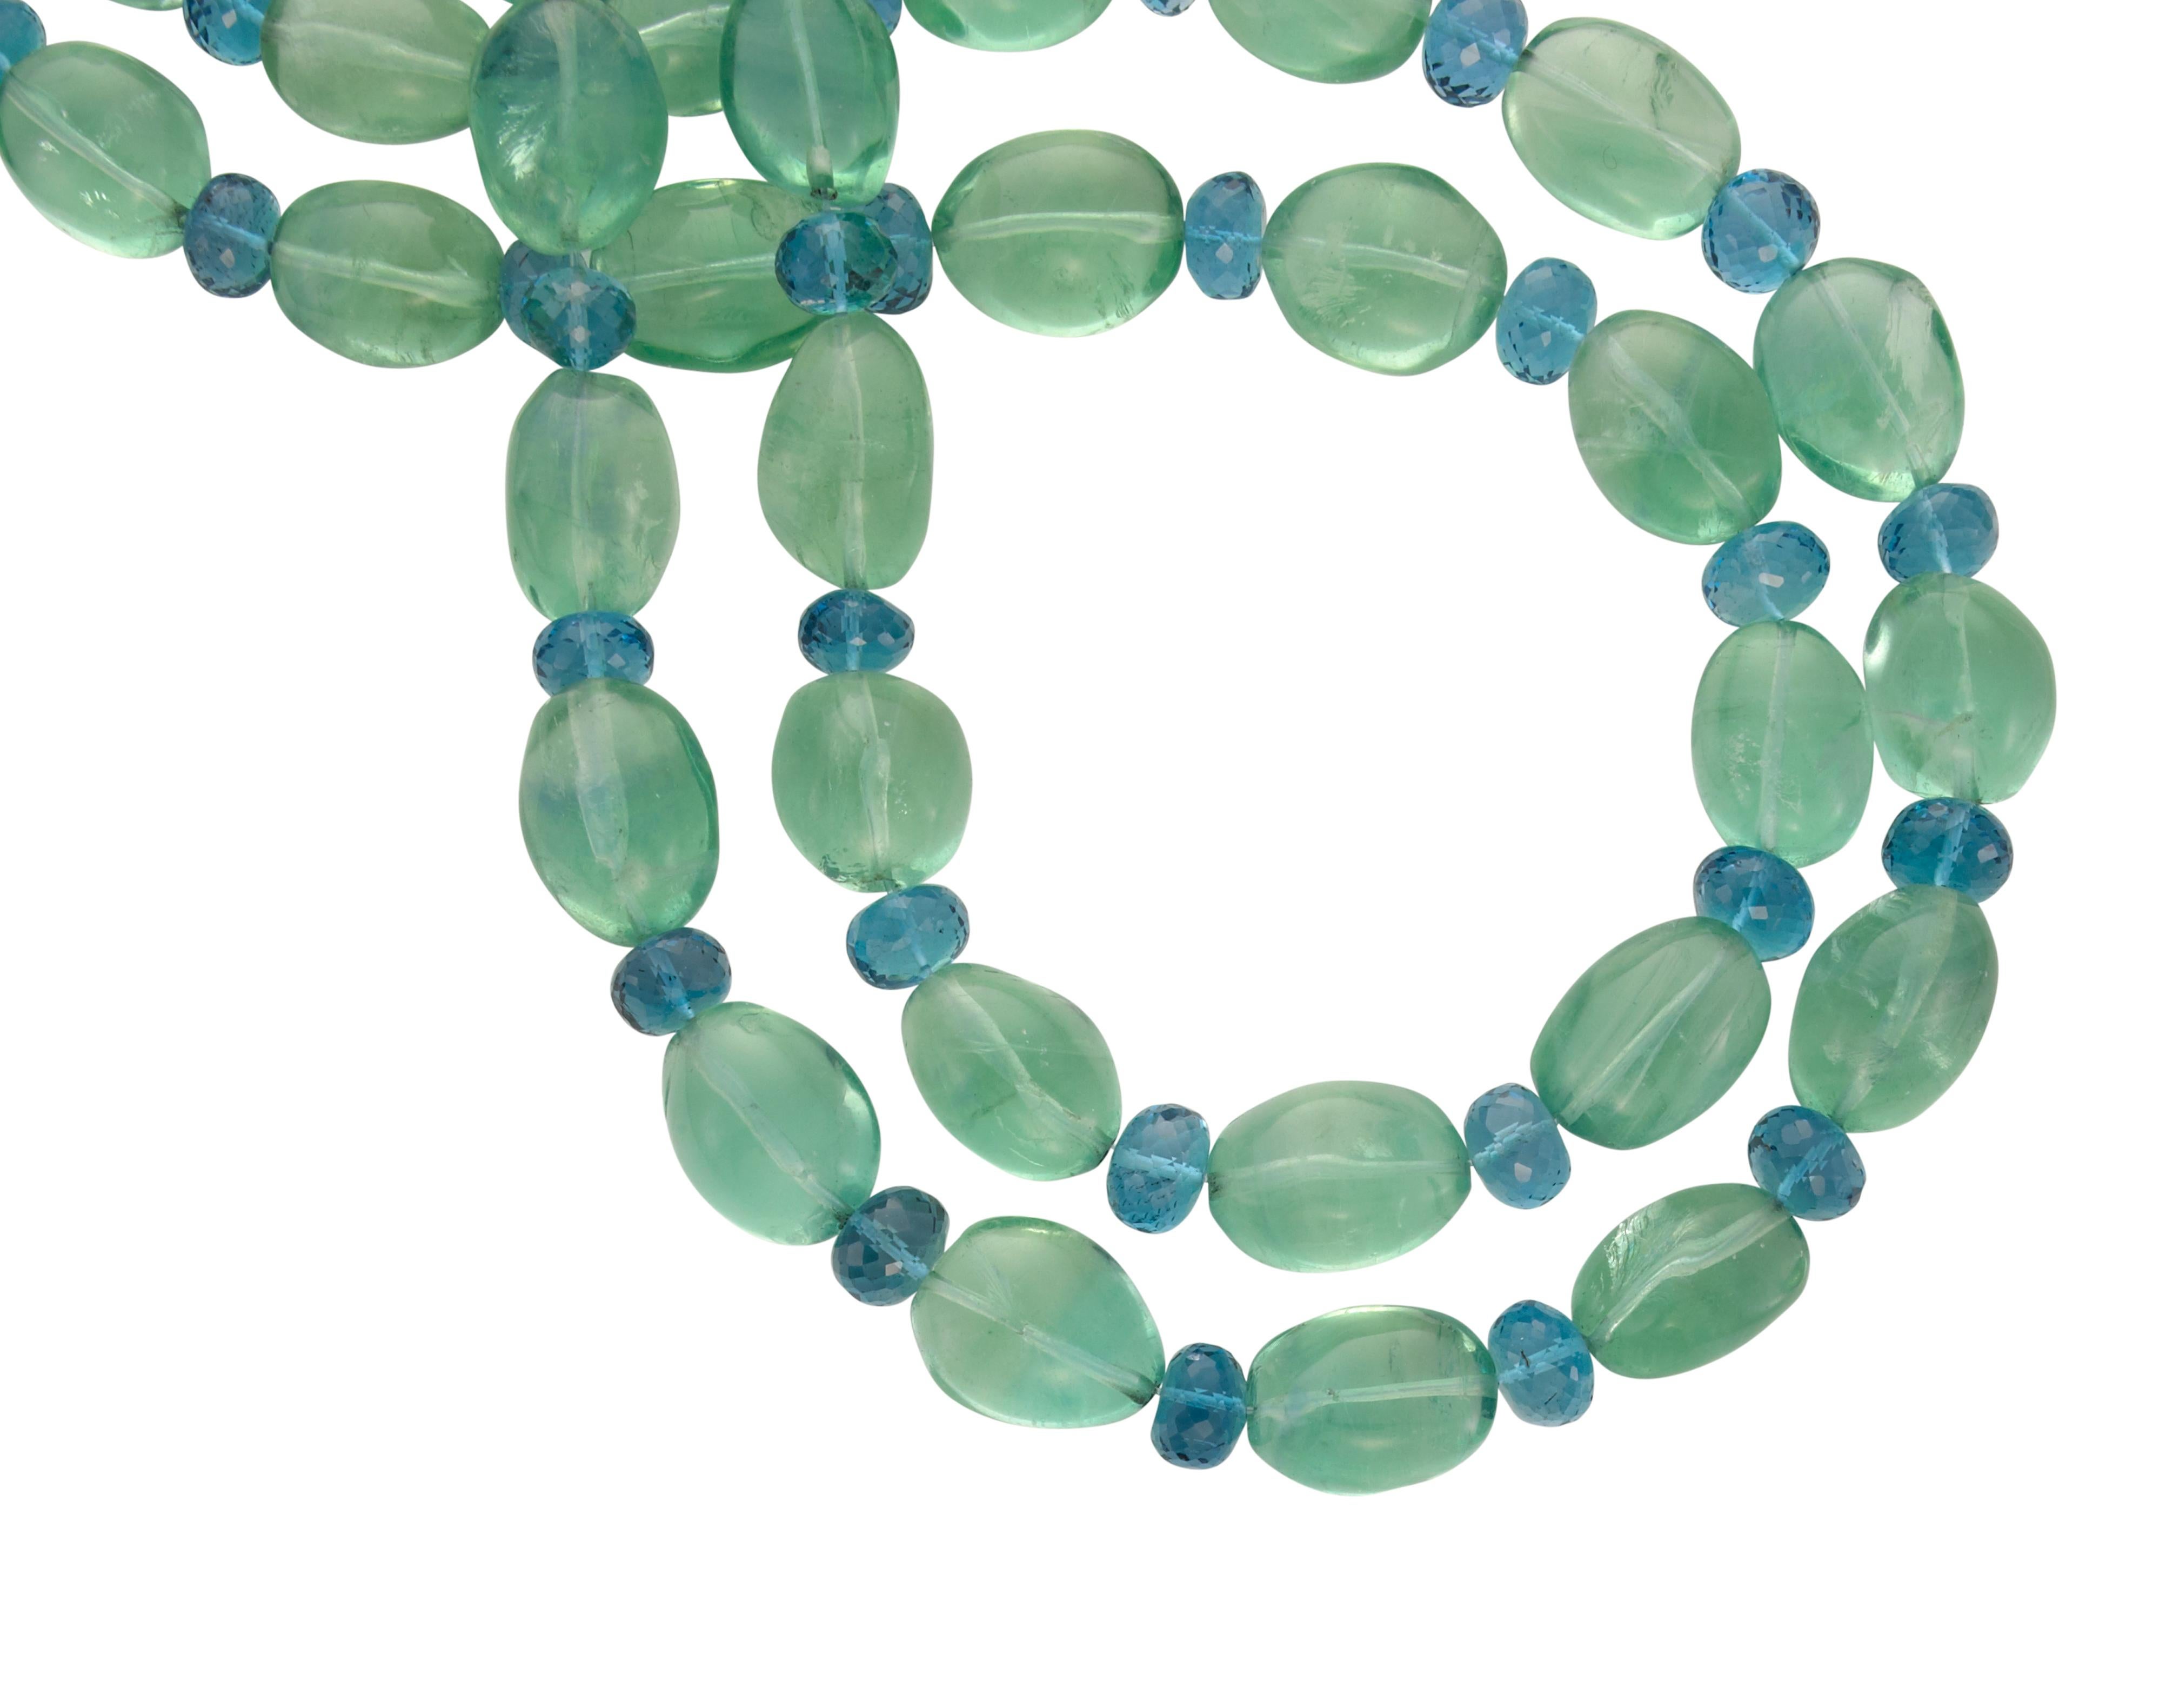 Contemporary Sorab & Roshi Fluorite Bead Necklace with Faceted Blue Topaz Bead Accent For Sale